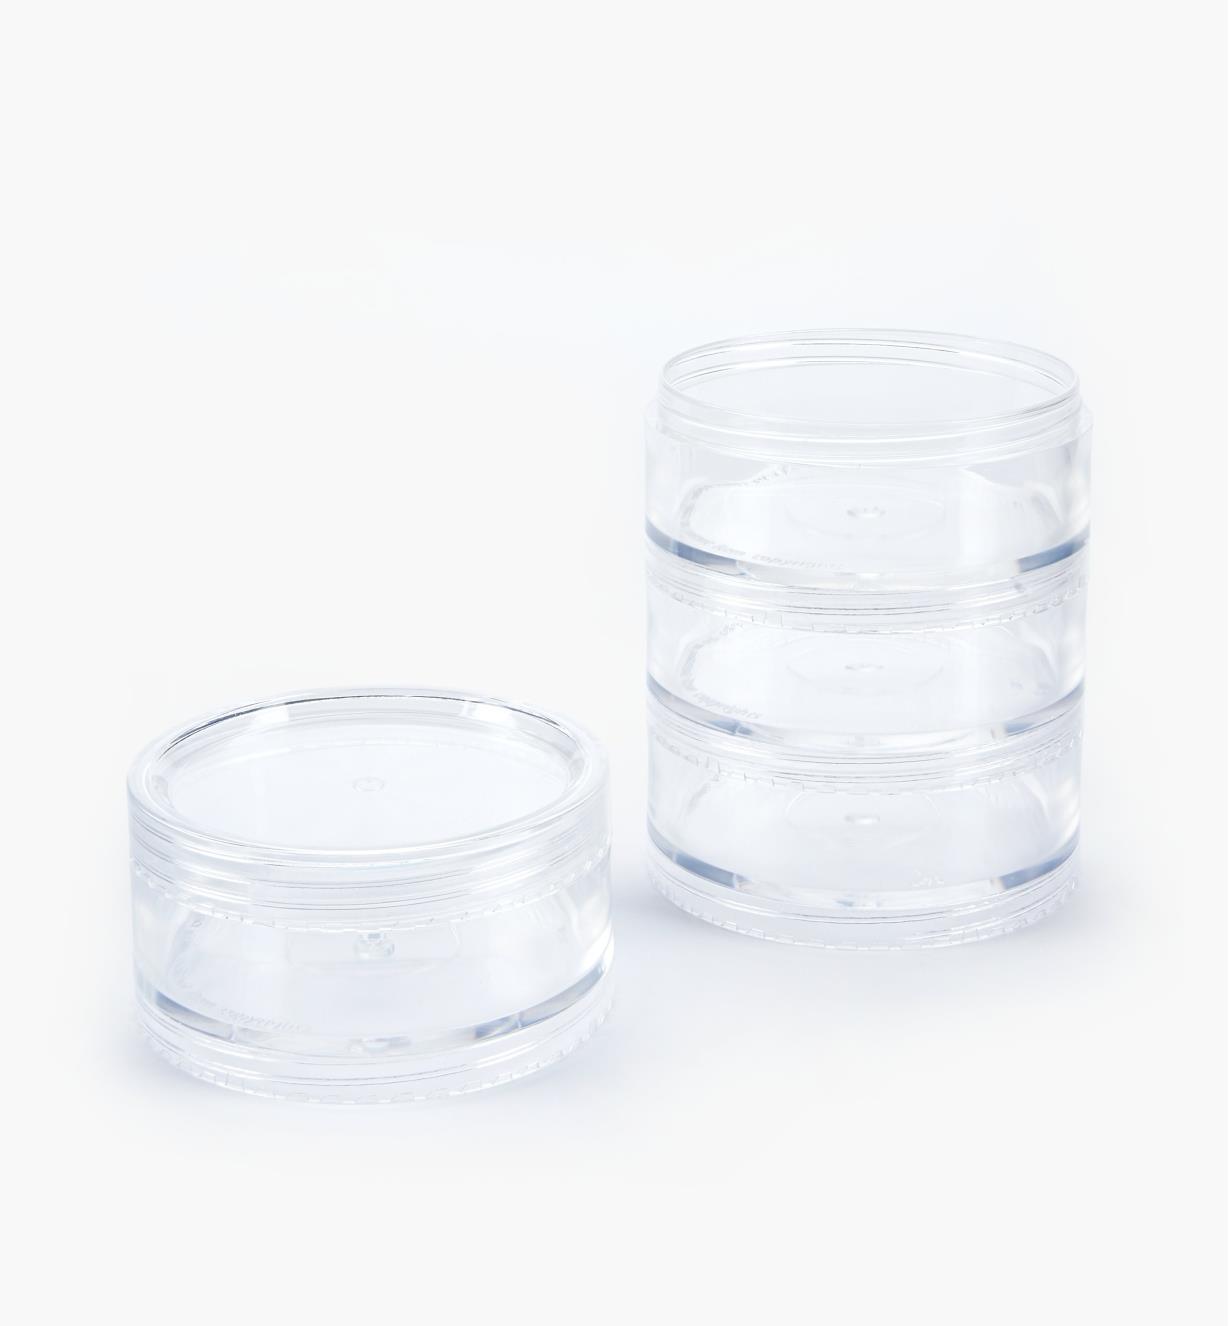 99W0270 - 70mm Jars, stack of 4